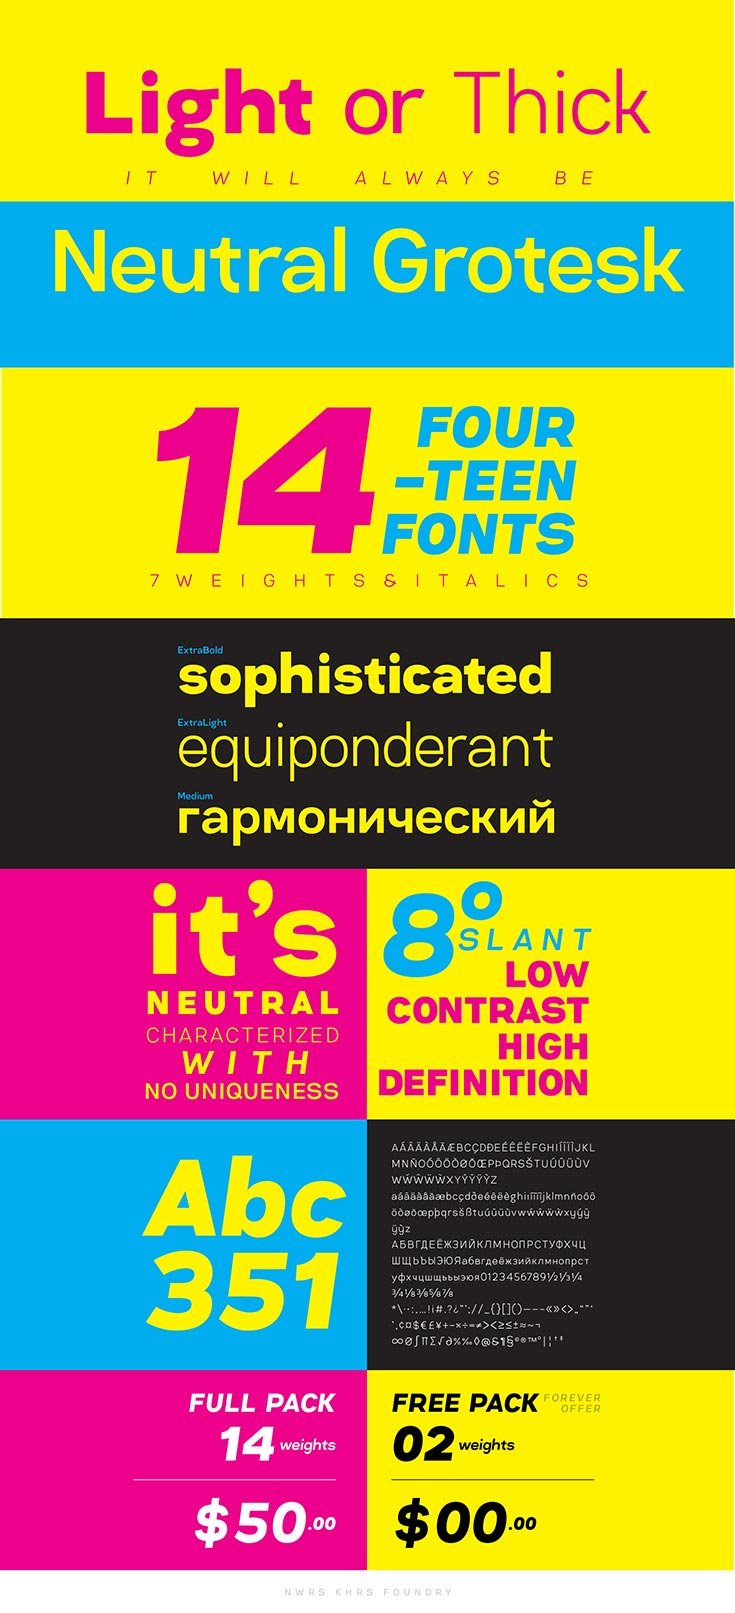 Free Neutral Grotesk Typeface